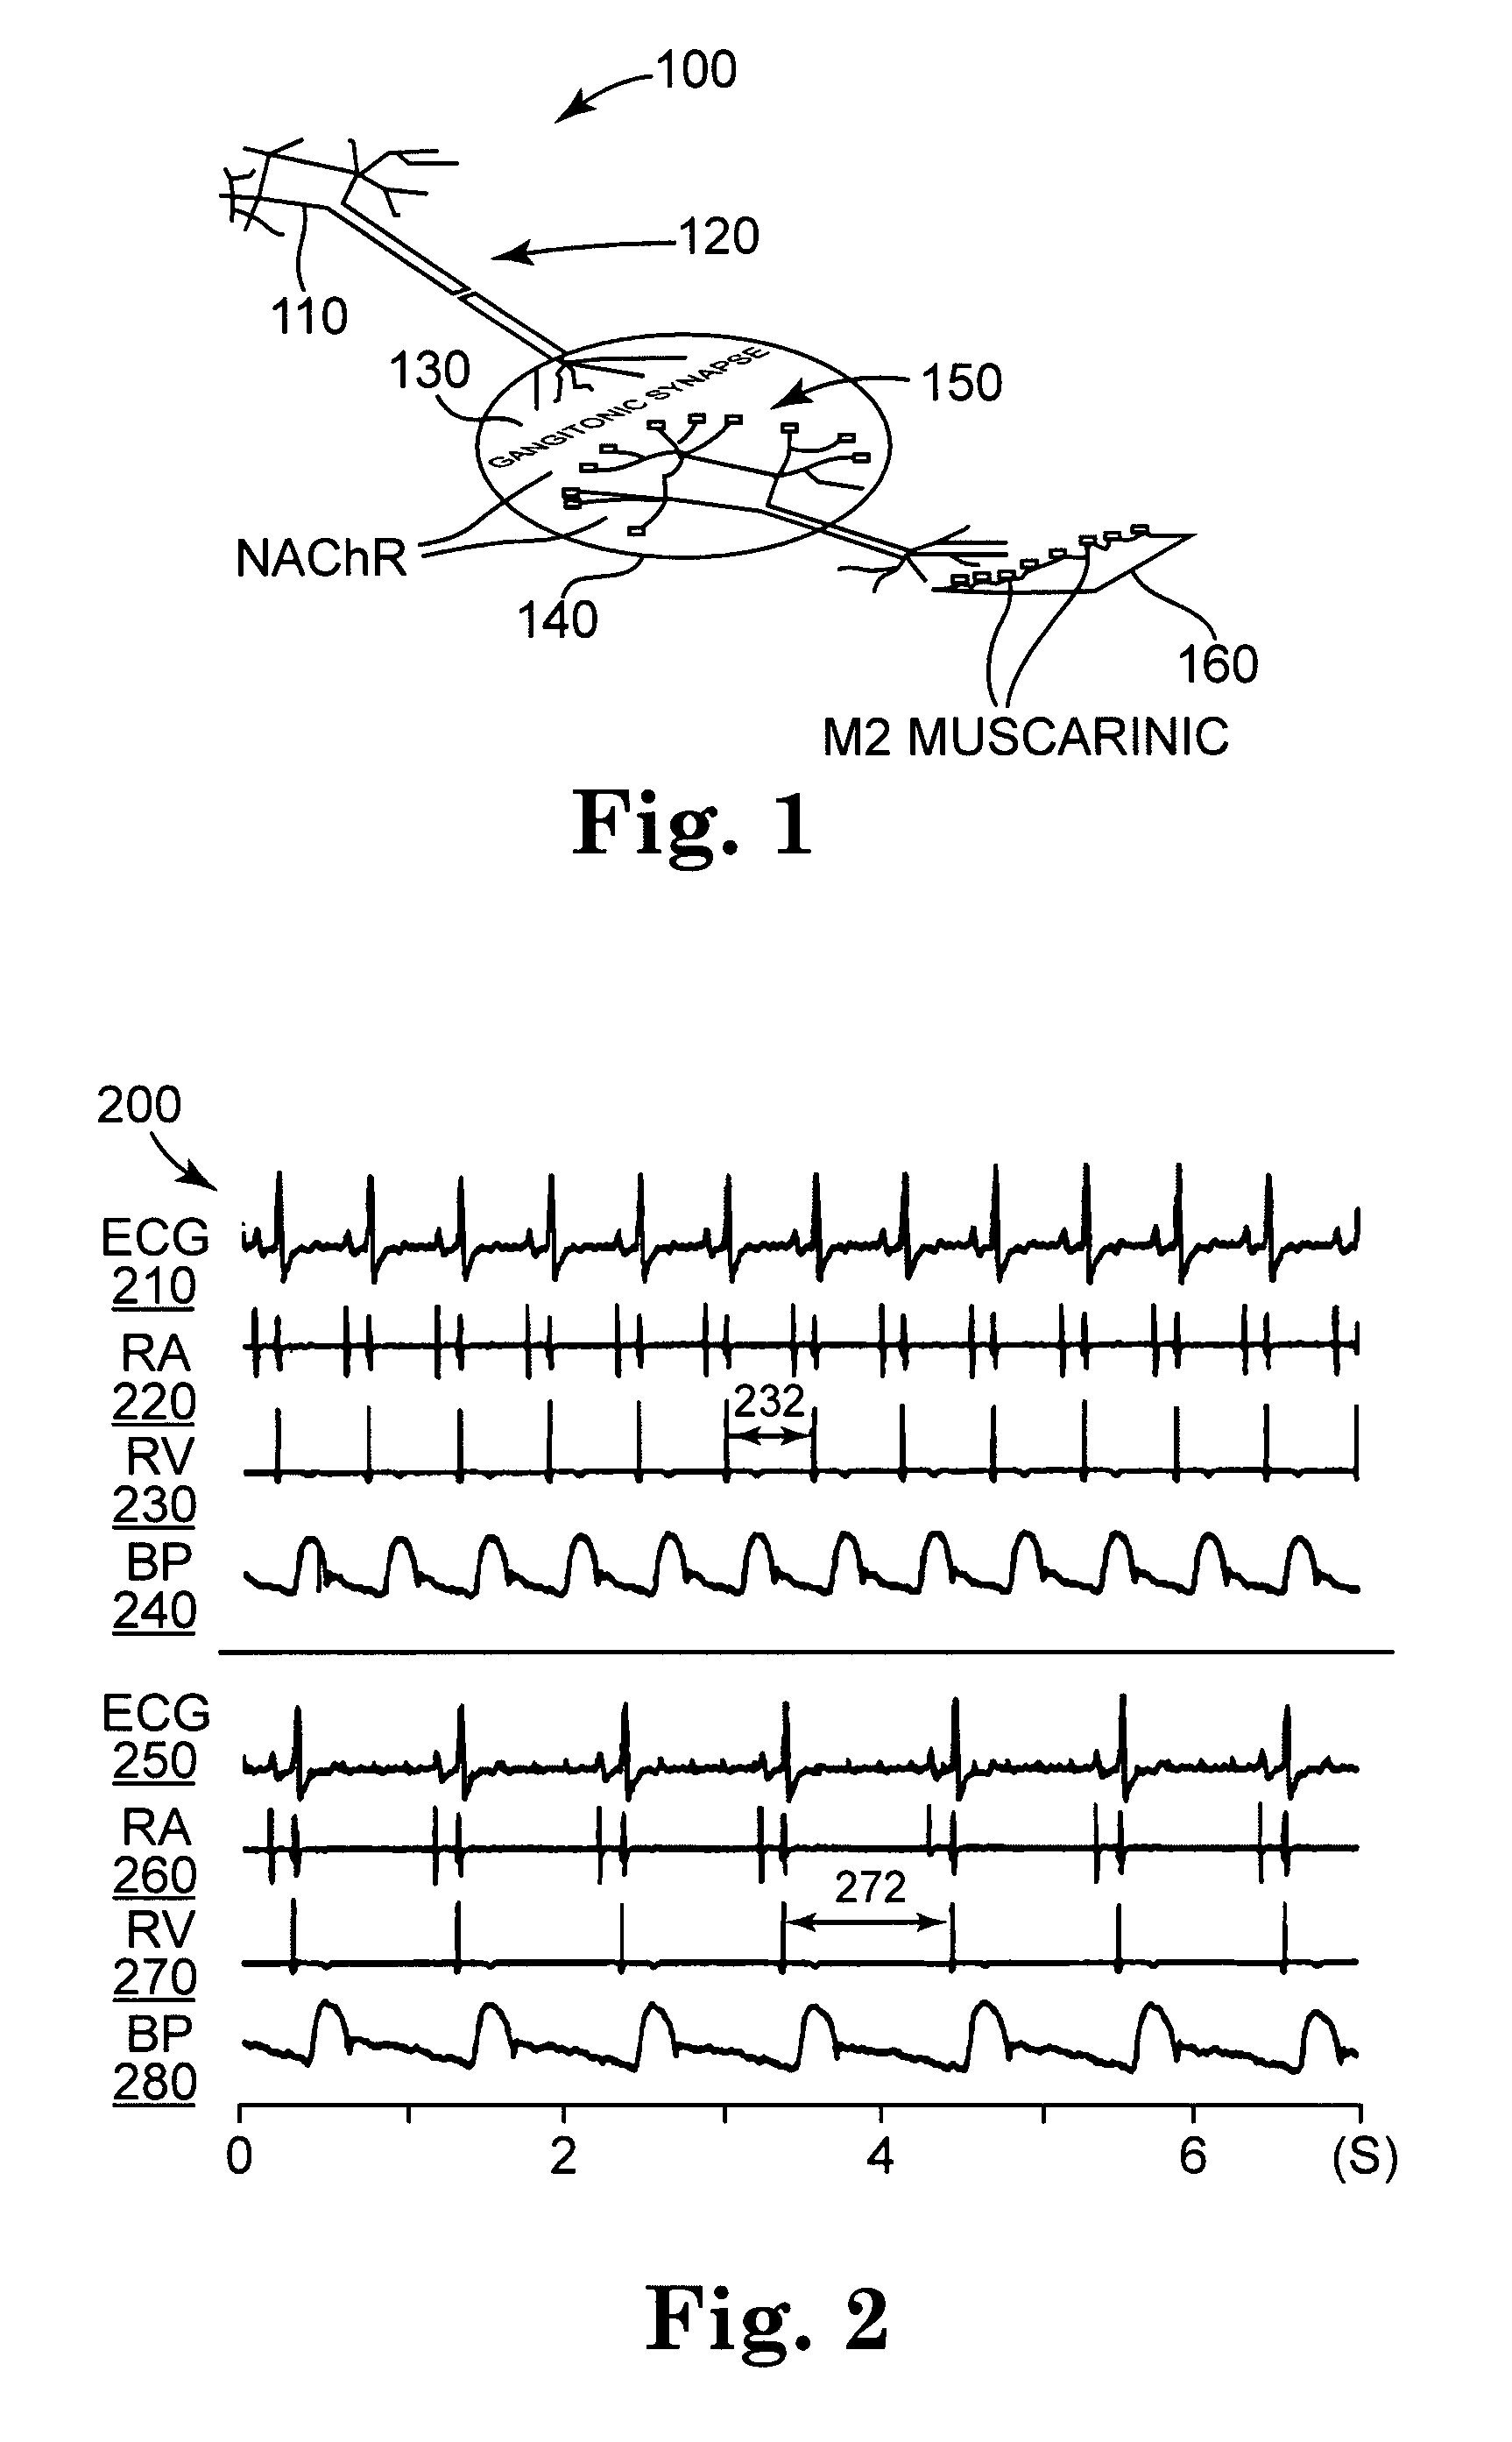 Treatment of cardiac arrhythmia by modification of neuronal signaling through fat pads of the heart